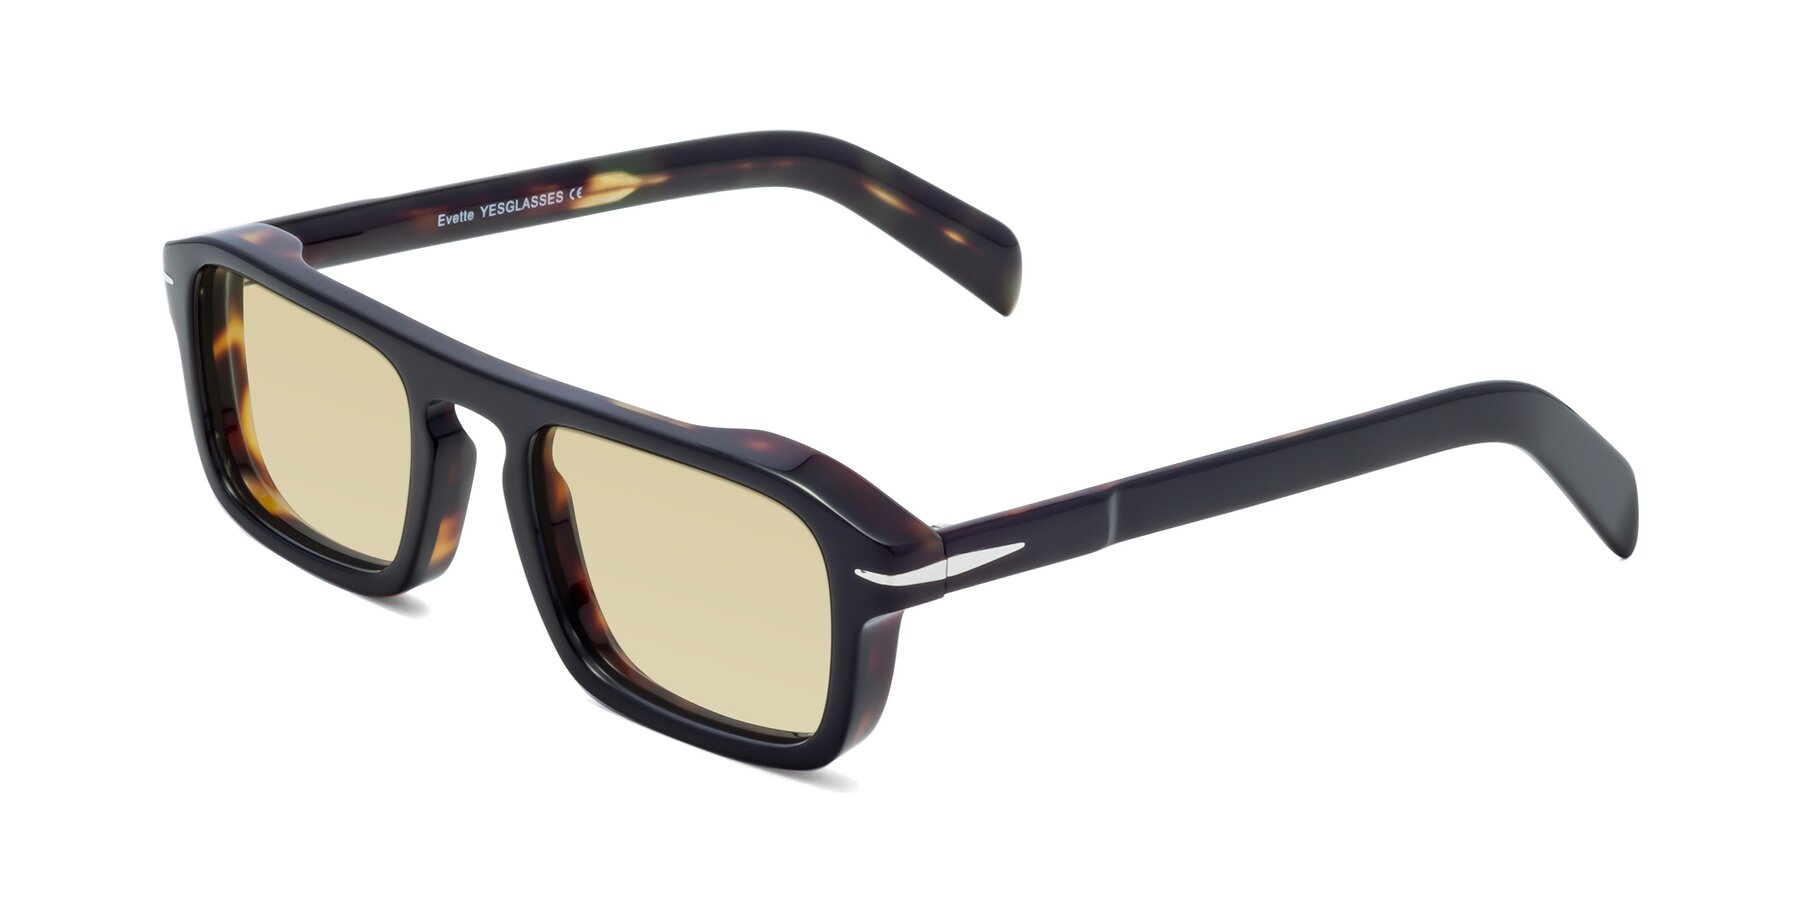 Angle of Evette in Black-Tortoise with Light Champagne Tinted Lenses